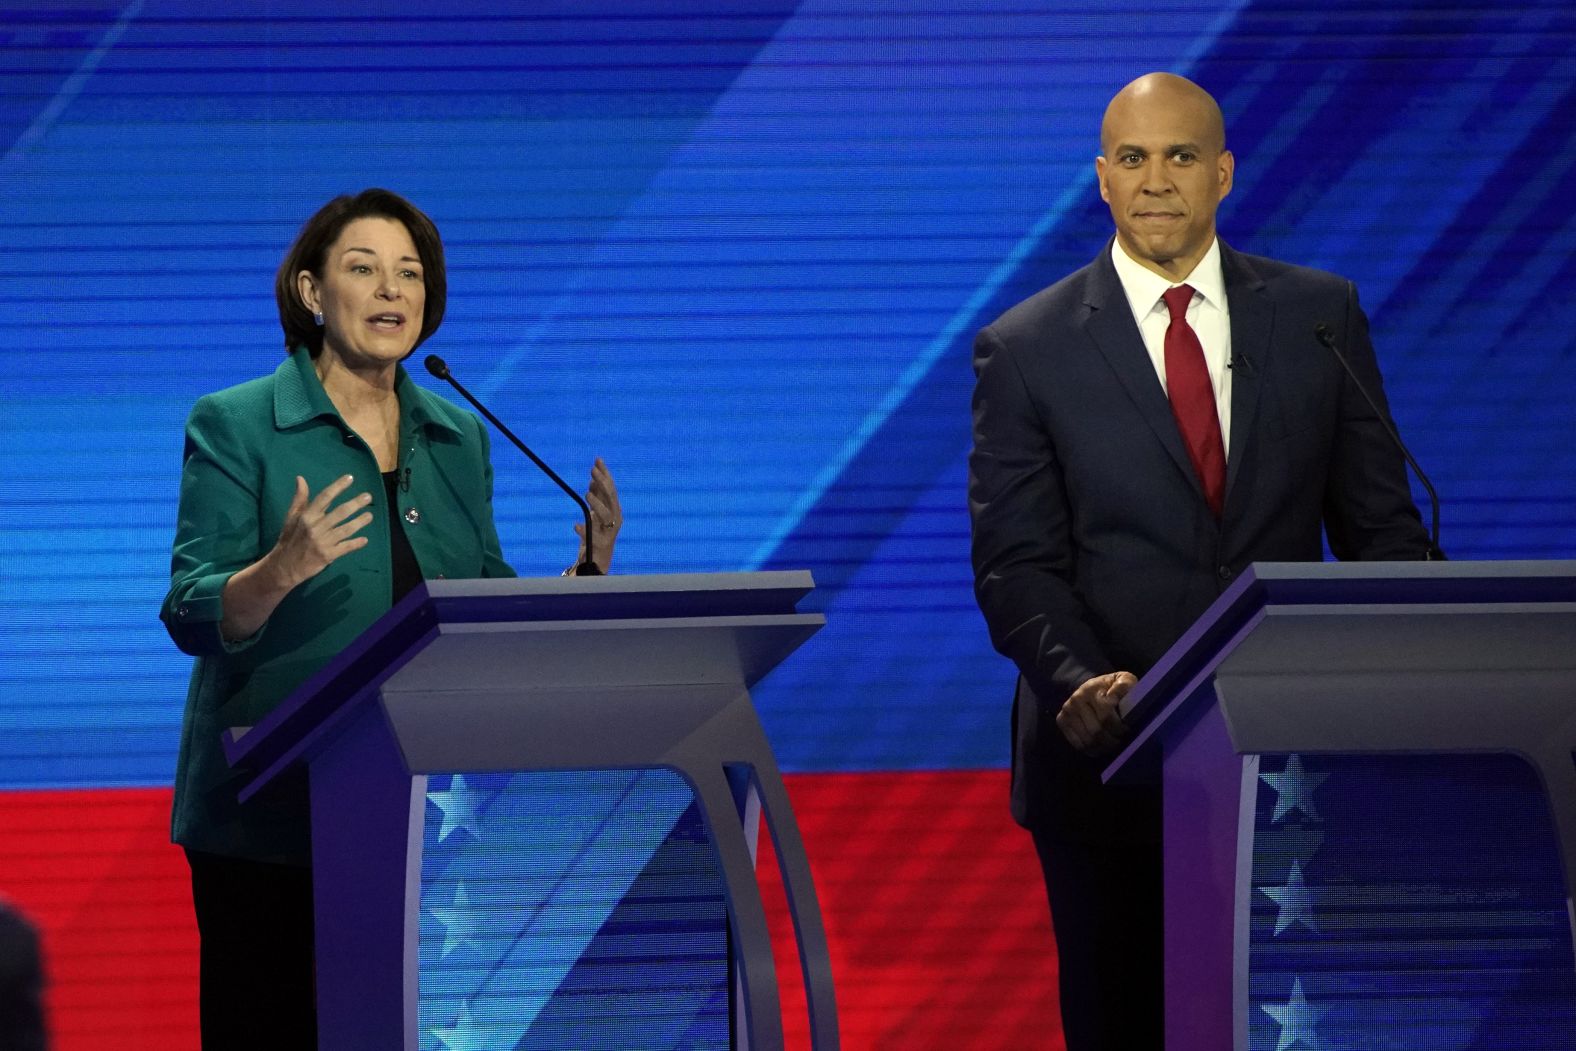 Klobuchar opened the debate by <a href="https://www.cnn.com/politics/live-news/democratic-debate-september-2019/h_d9244d7f3e64285ab891d0dce3188f36" target="_blank">going after Sanders,</a> who often talks about how he "wrote the damn bill" on "Medicare for All." The US senator from Minnesota does not support the legislation. "While Bernie wrote the bill, I read the bill," Klobuchar said.